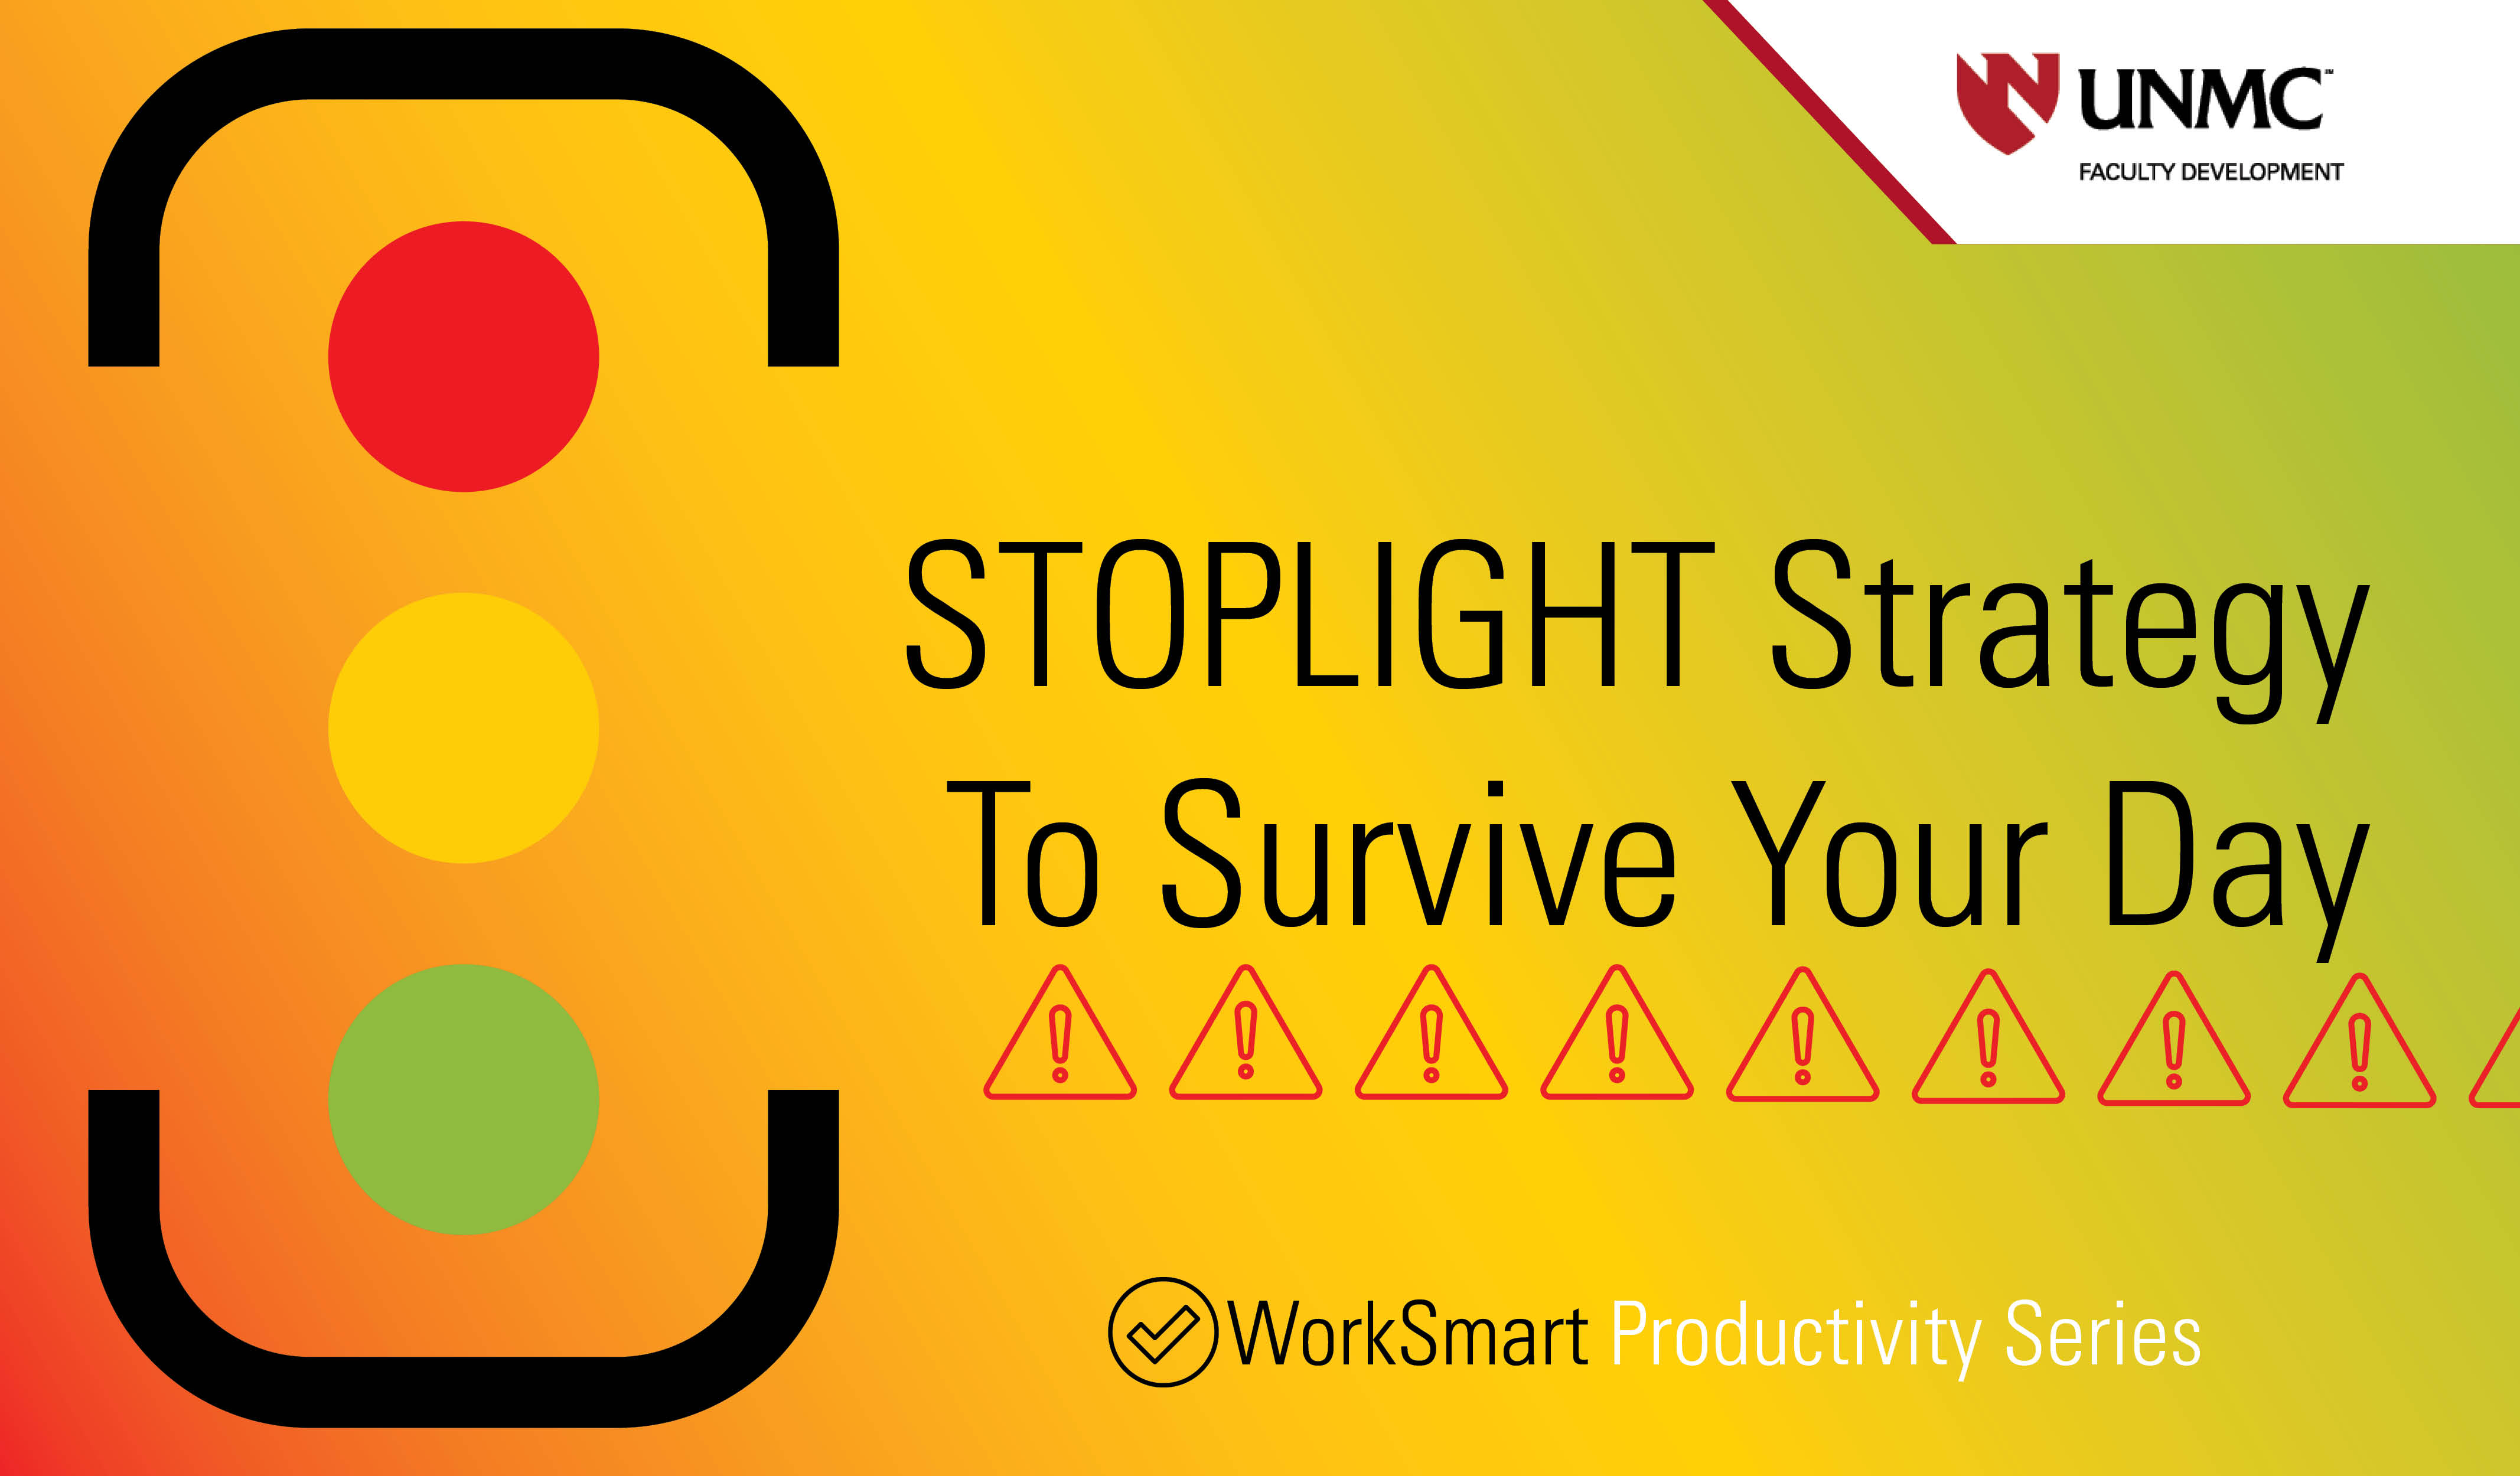 24.11.21_-_stoplight_strategy,_survive_your_day_worksmart.jpg